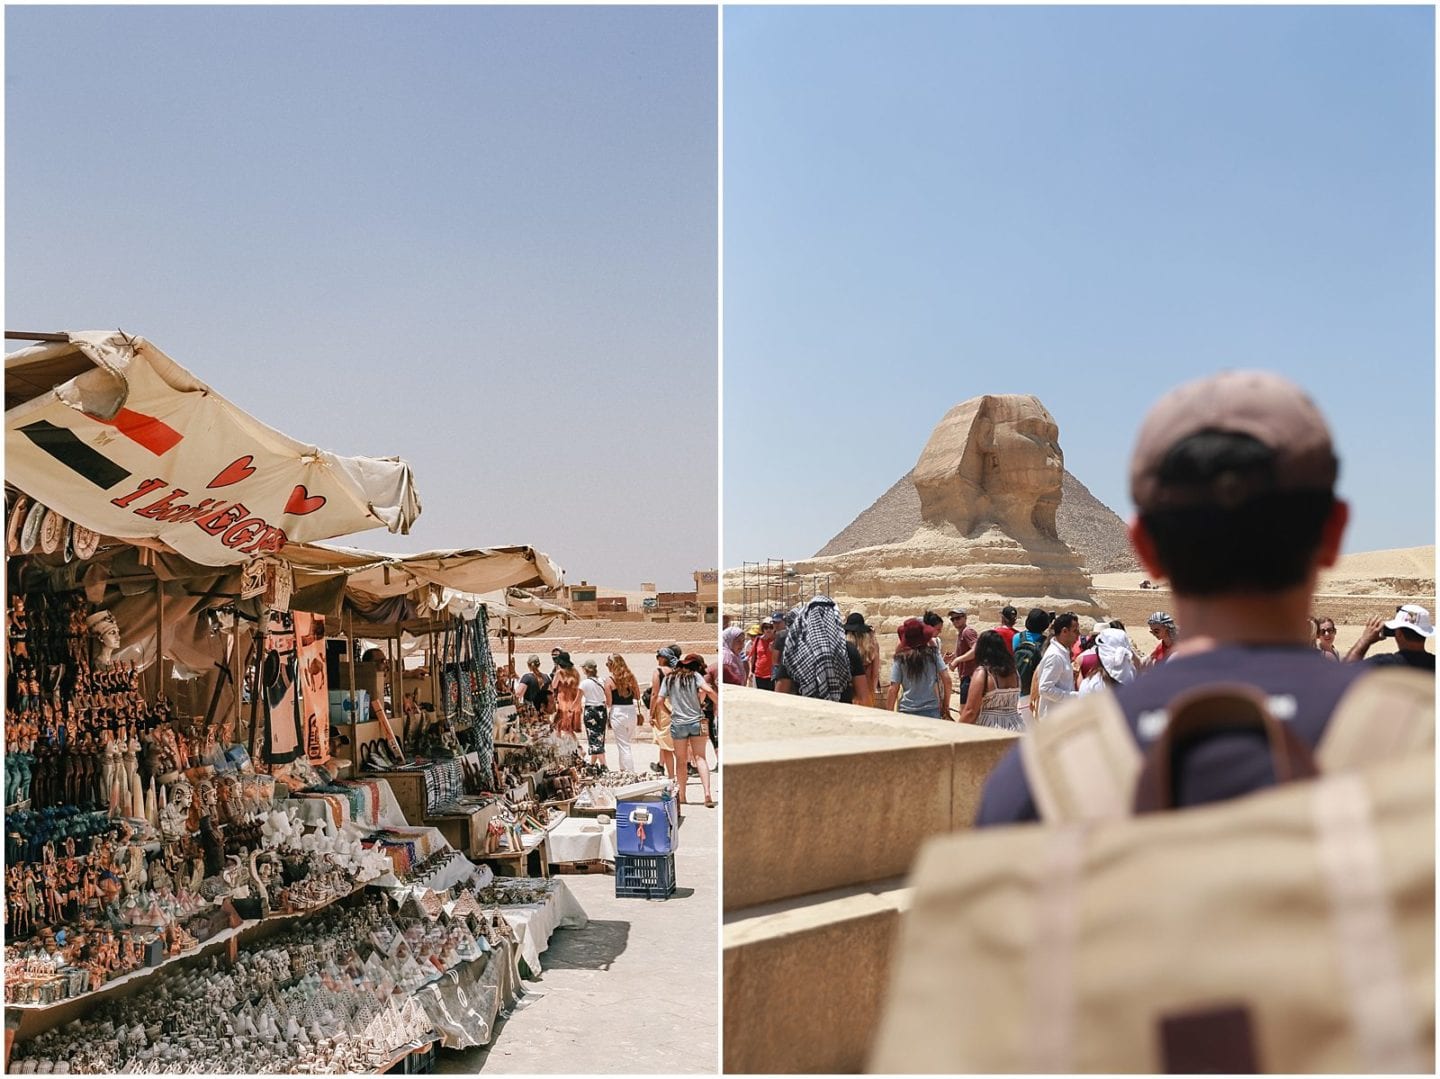 market stalls at Pyramids of Giza Sphinx in Egypt 